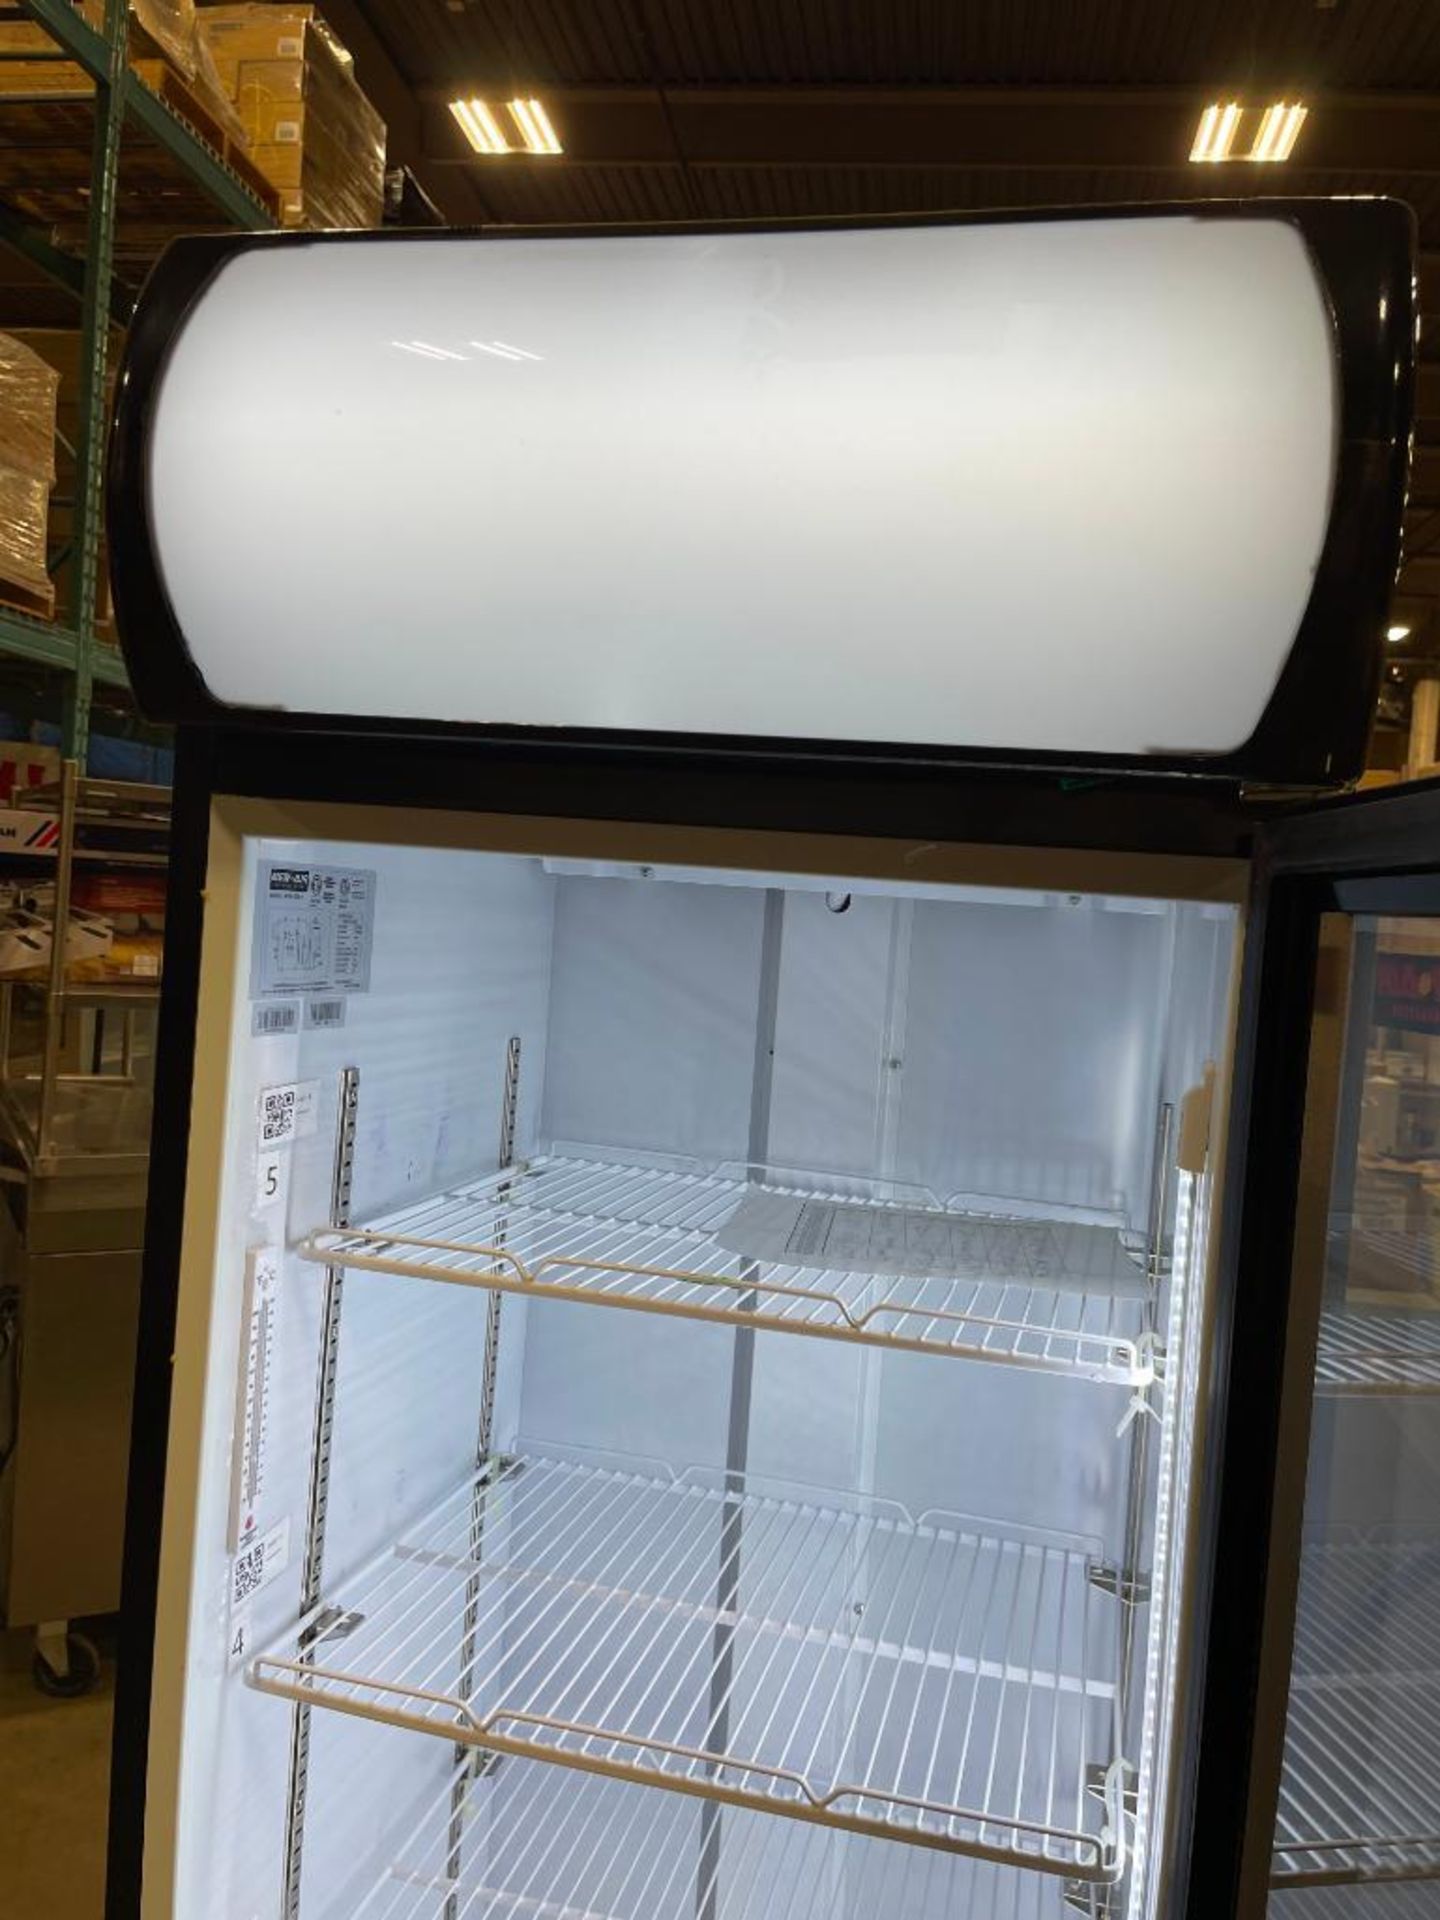 NEW-AIR NGR-036-H SINGLE GLASS DOOR DISPLAY COOLER - Image 5 of 14